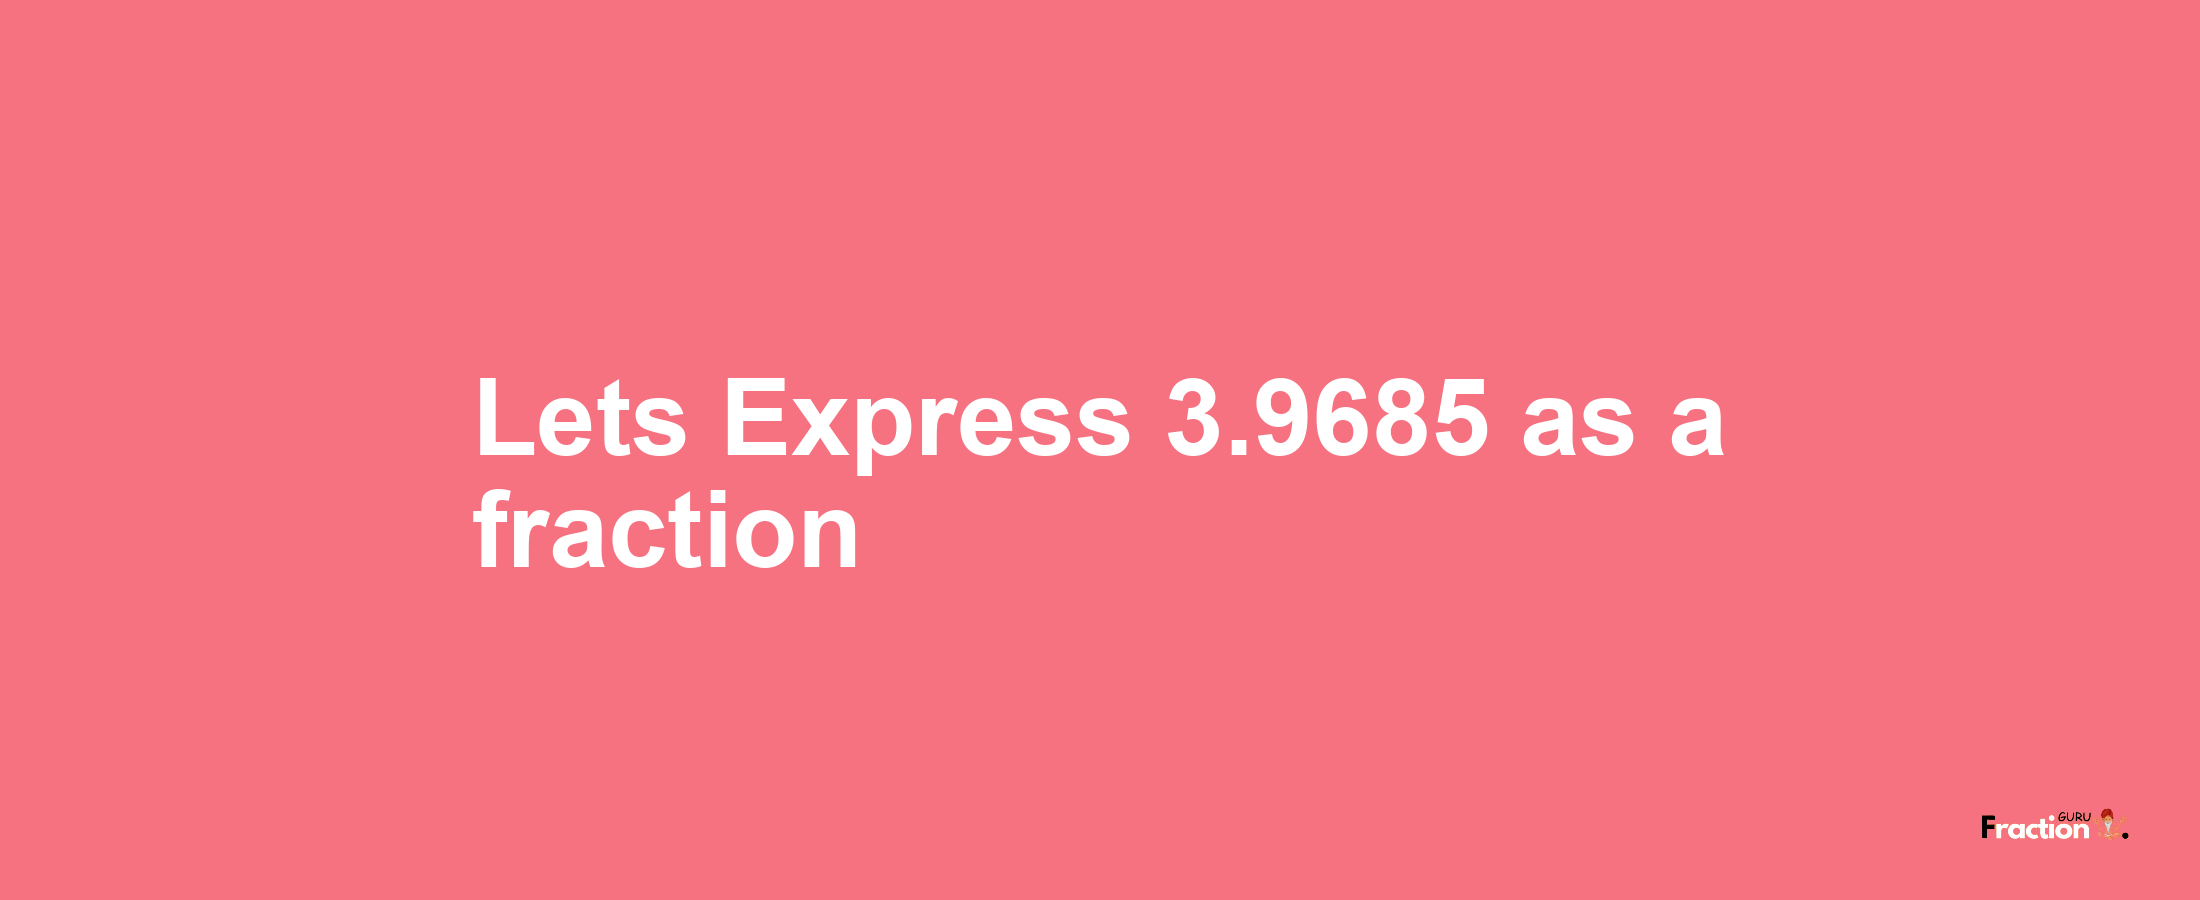 Lets Express 3.9685 as afraction